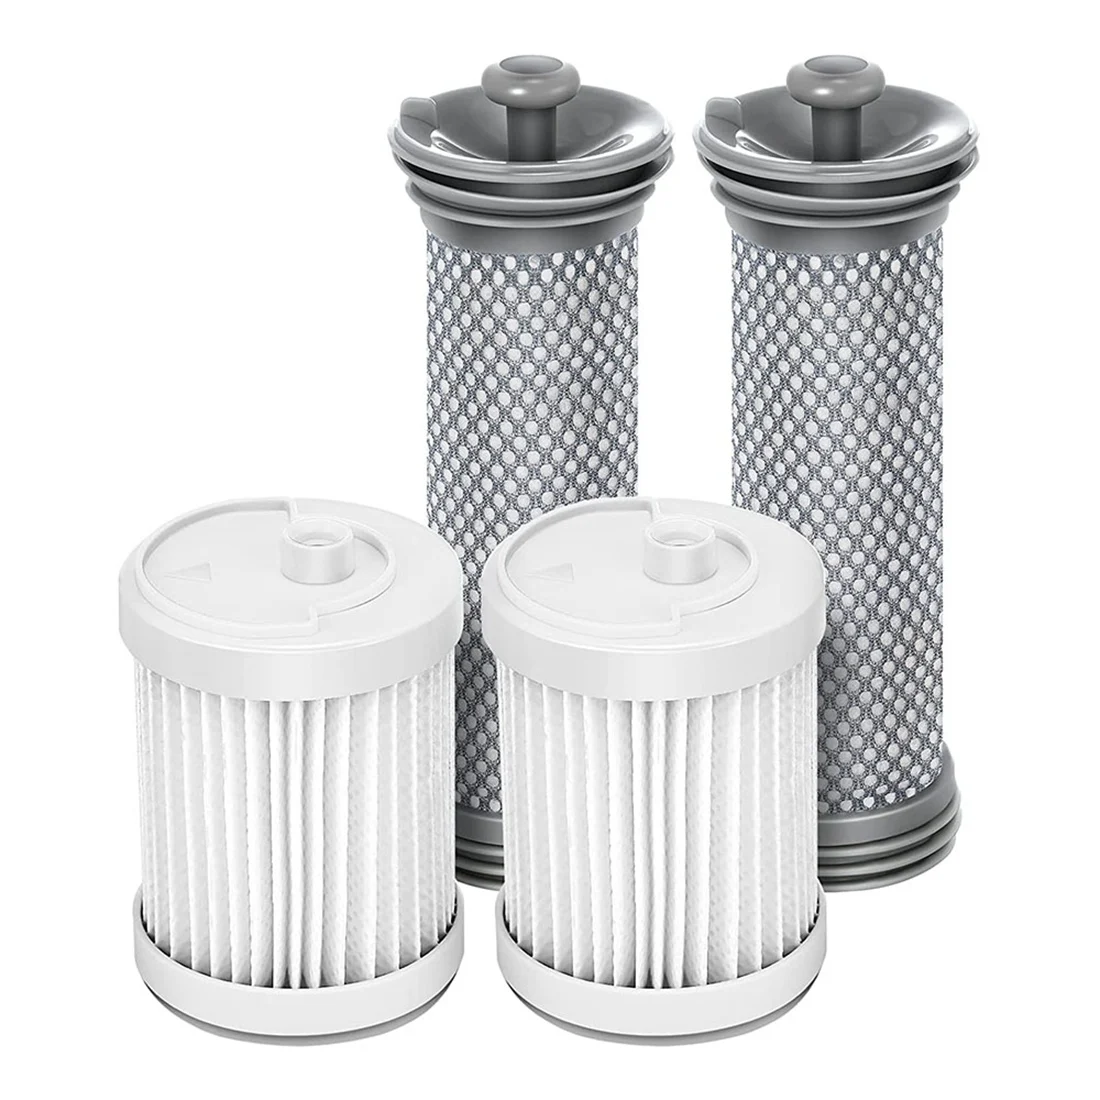 1Set Replacement Filter Kit Compatible with for Tineco A10/A11 Hero, A10/A11 Cordless Vacuums, Pre Filters & HEPA Filter